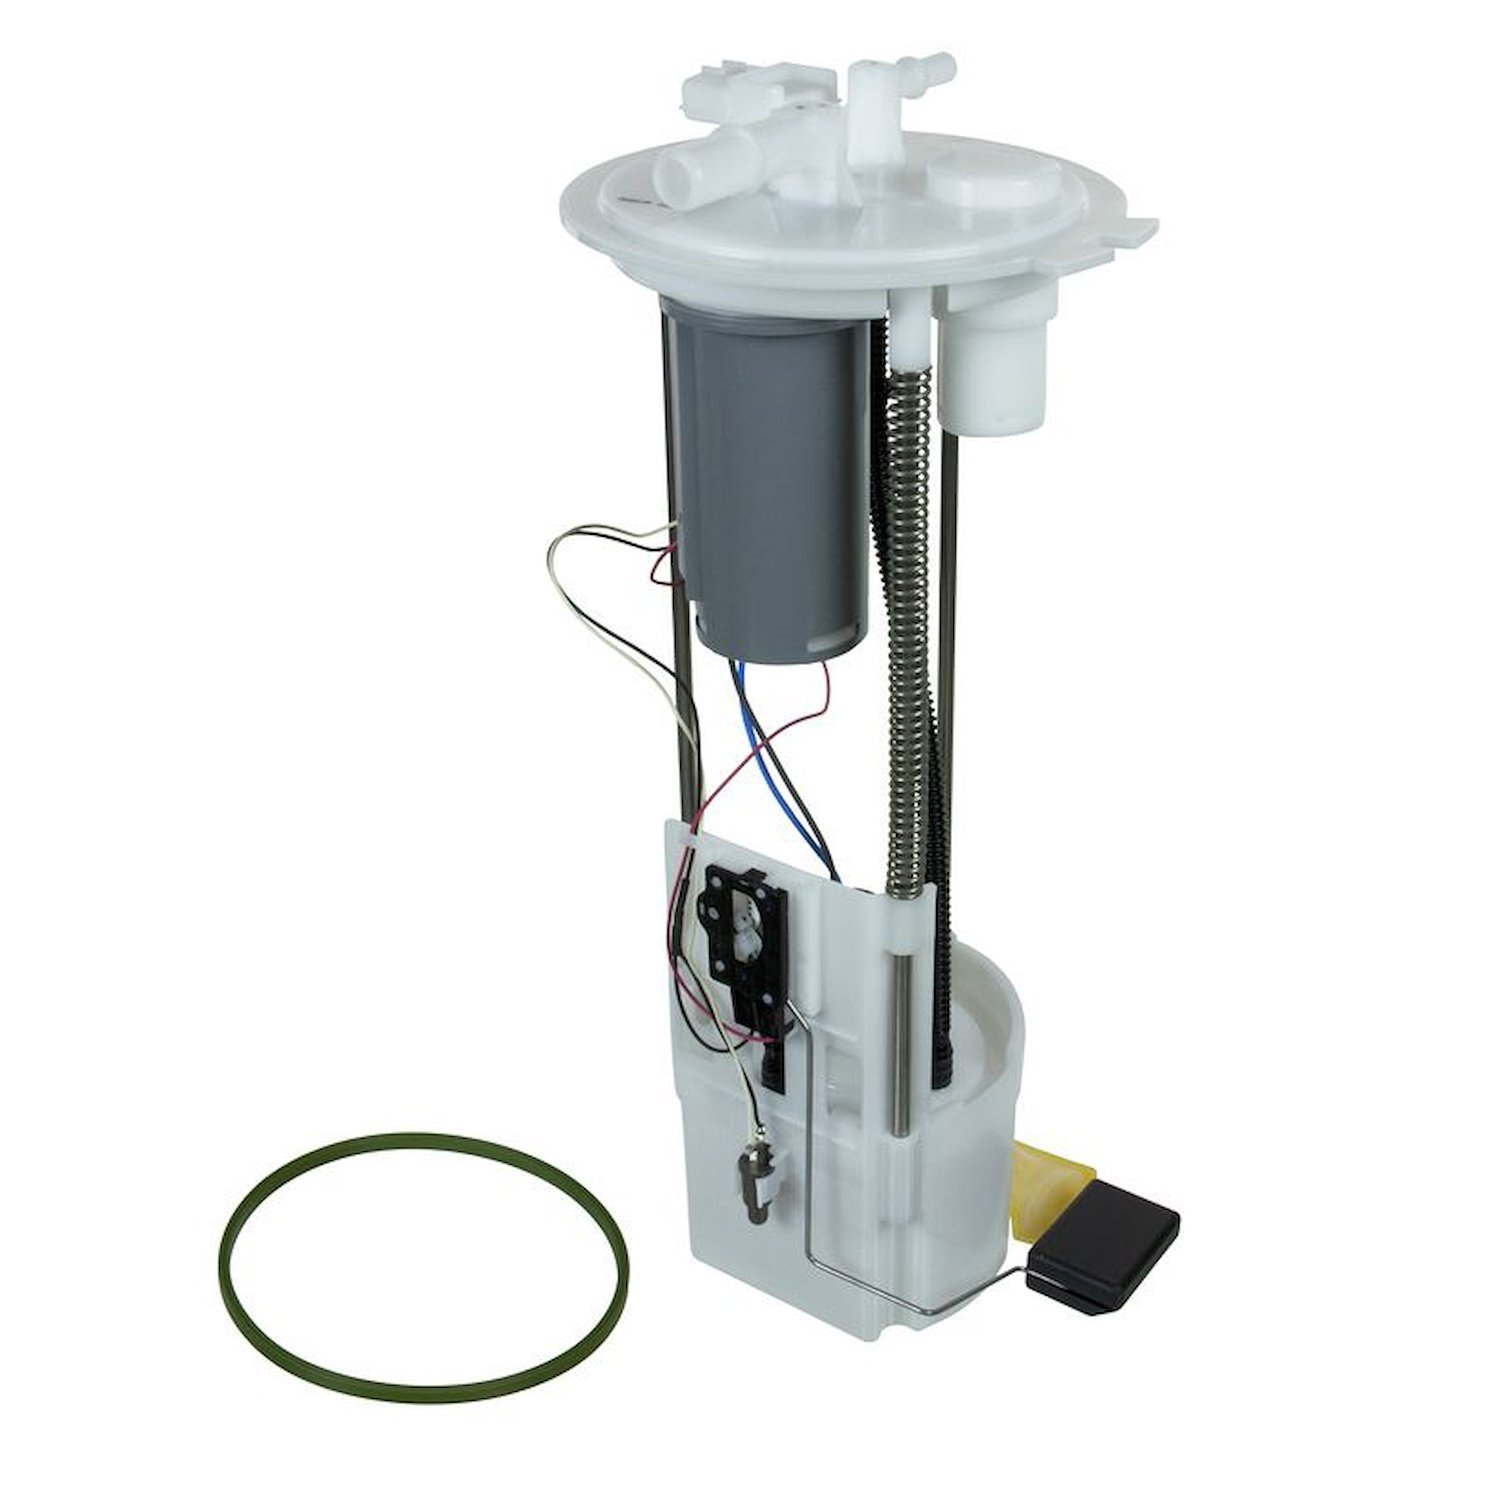 OE Replacement Fuel Pump Module Assembly for 2007-2010 Infiniti QX56/2007-2015 Nissan Armada/Nissan Titan